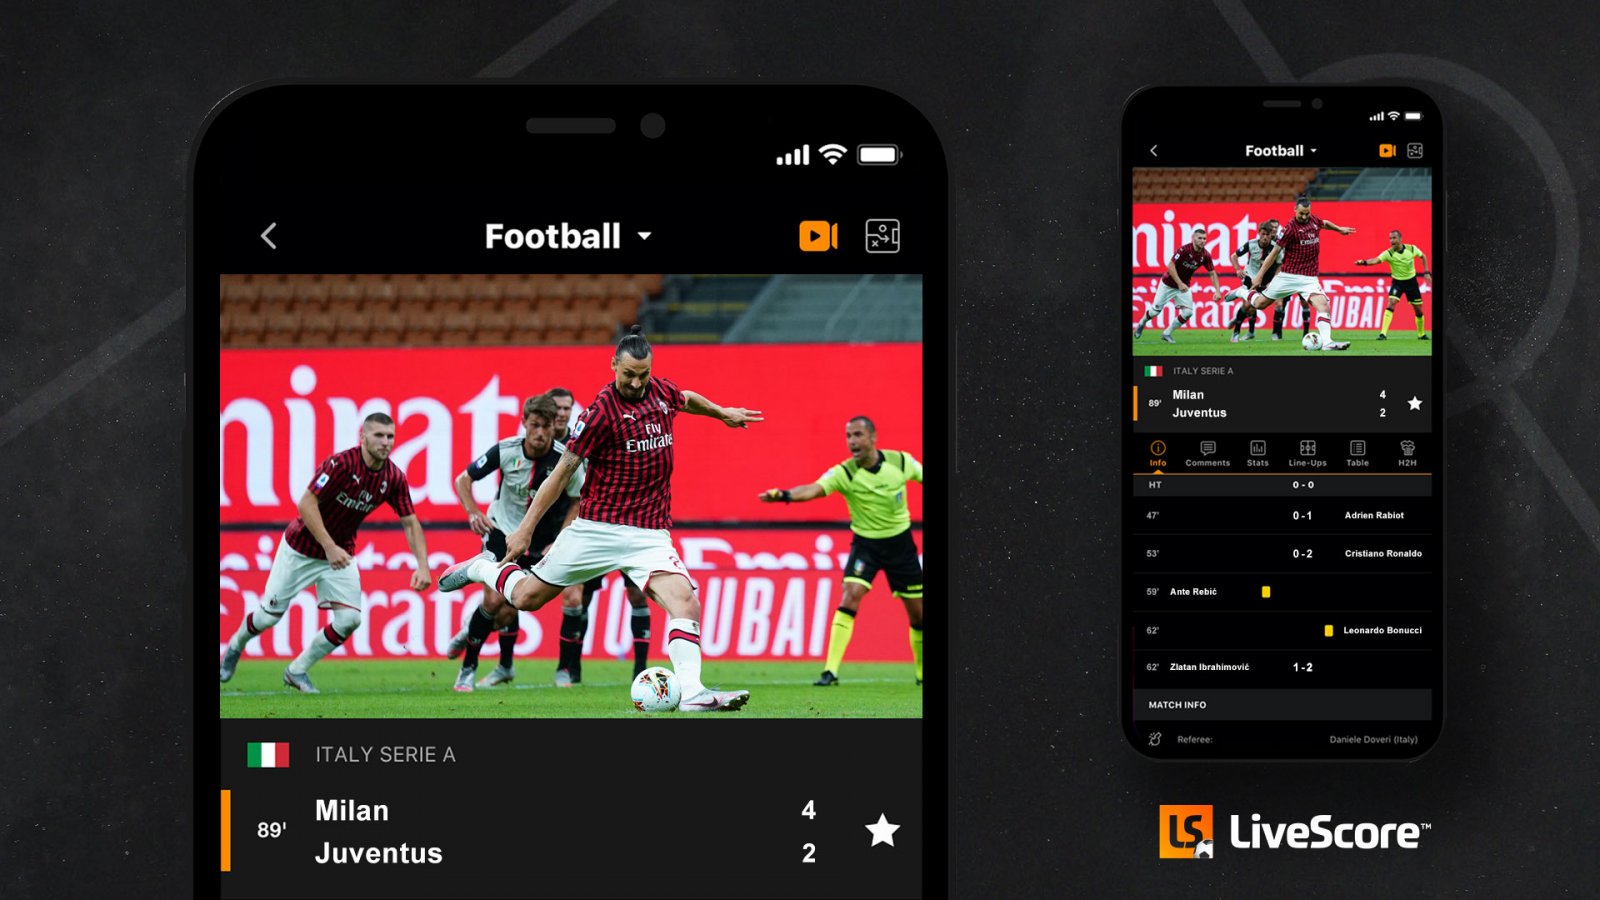 LiveScore Announces Expanded Rights for its 2020-21 Free-To-Air Football Service After Achieving Half a Million Viewers Since June Digital Sport